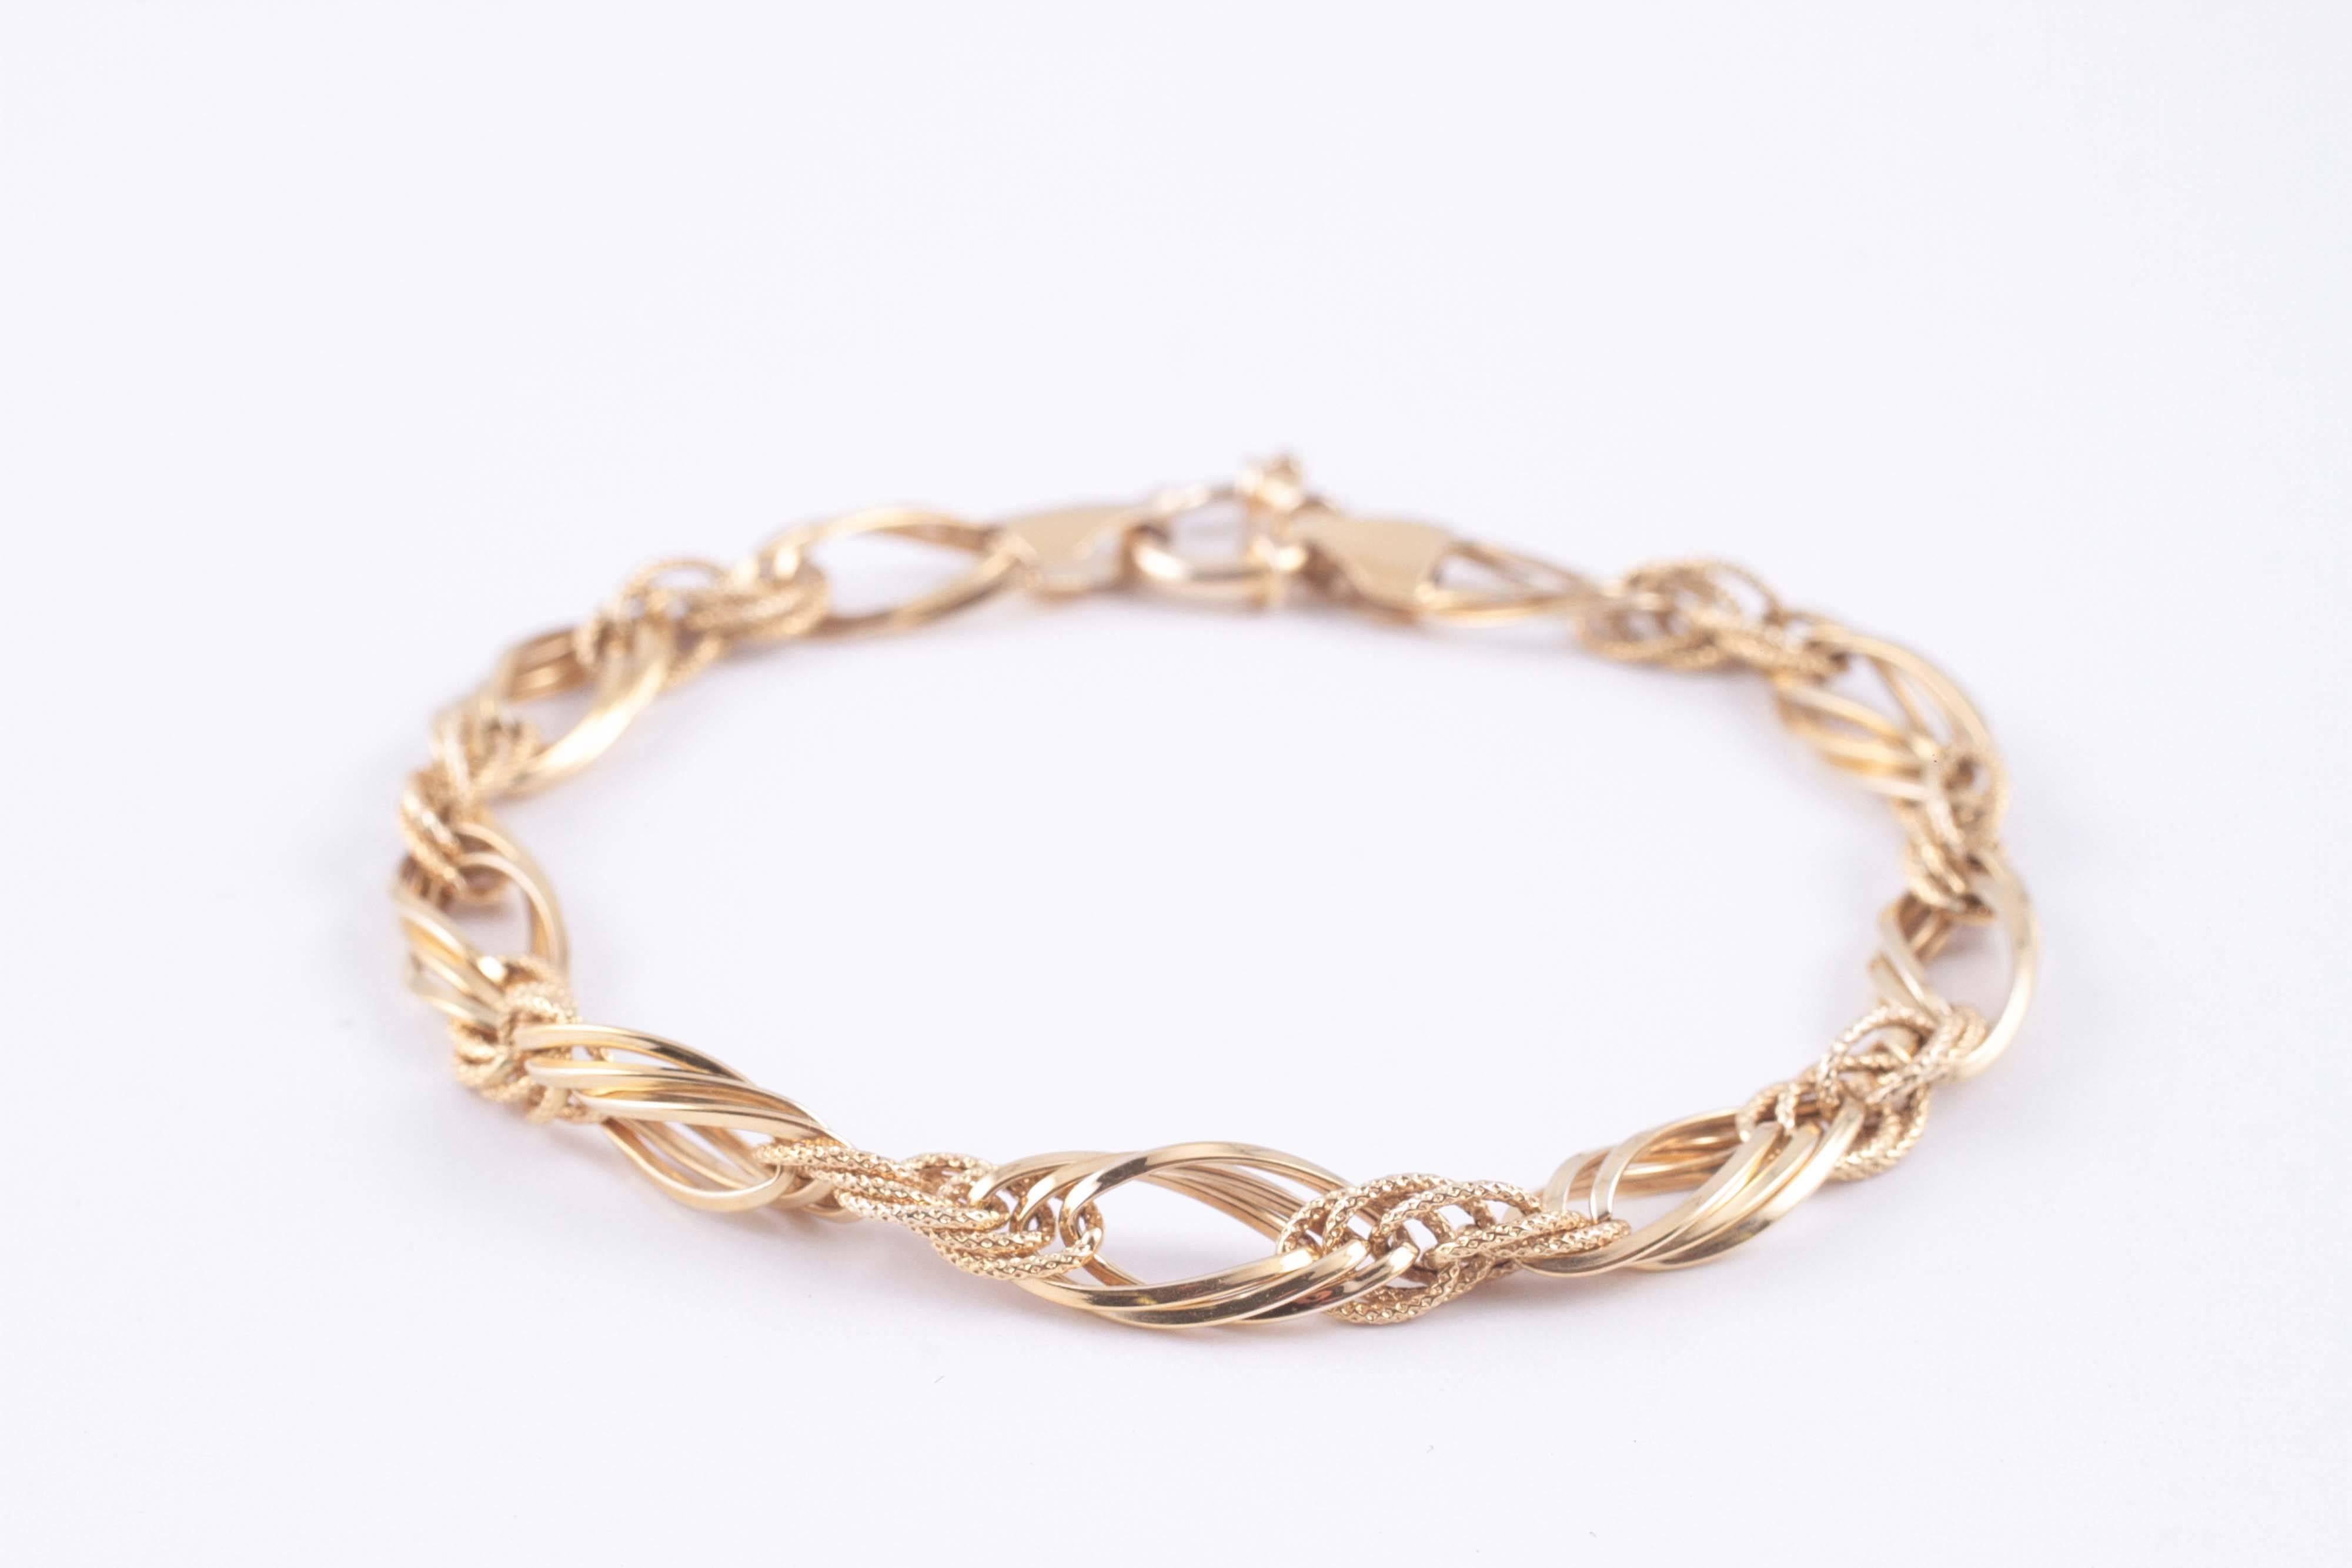 With interlocking textured and oval links.  Over-sized spring ring clasp makes it easy to get on and off!